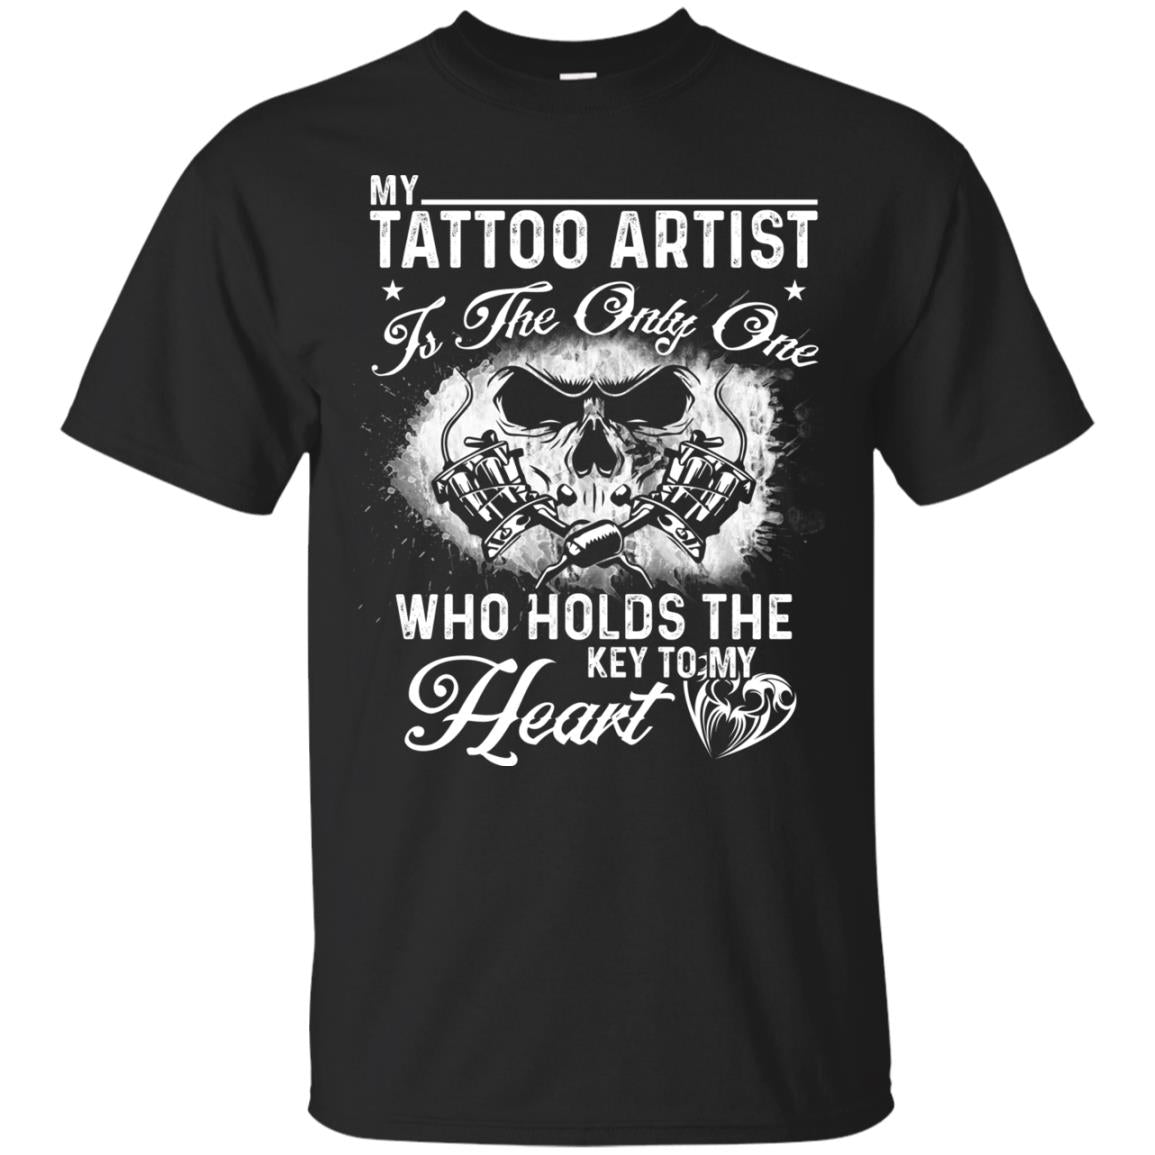 My Tatto Artist T-shirt The Only One Who Holds The Key To My Heart